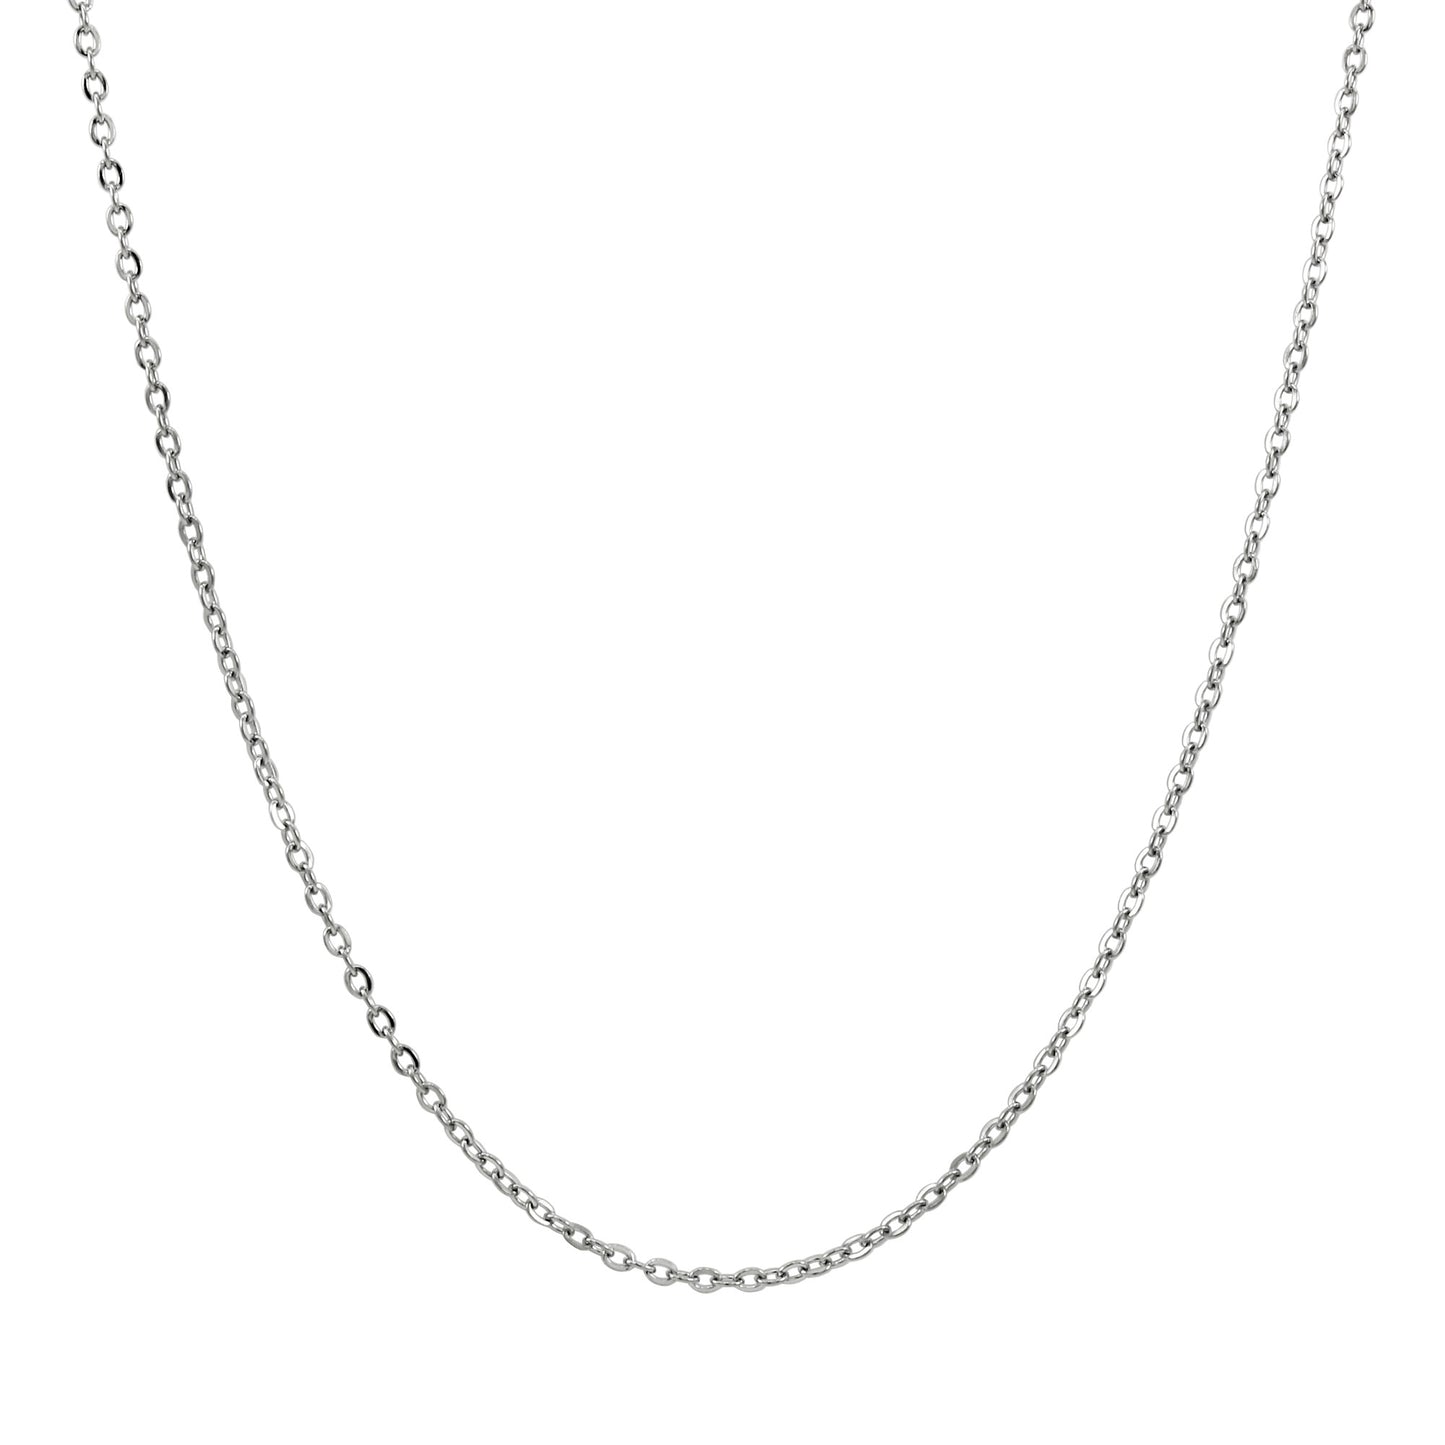 .925 Sterling Silver Chai Symbol (Jewish) Necklace With 22" Hypoallergenic Cable Chain Necklace